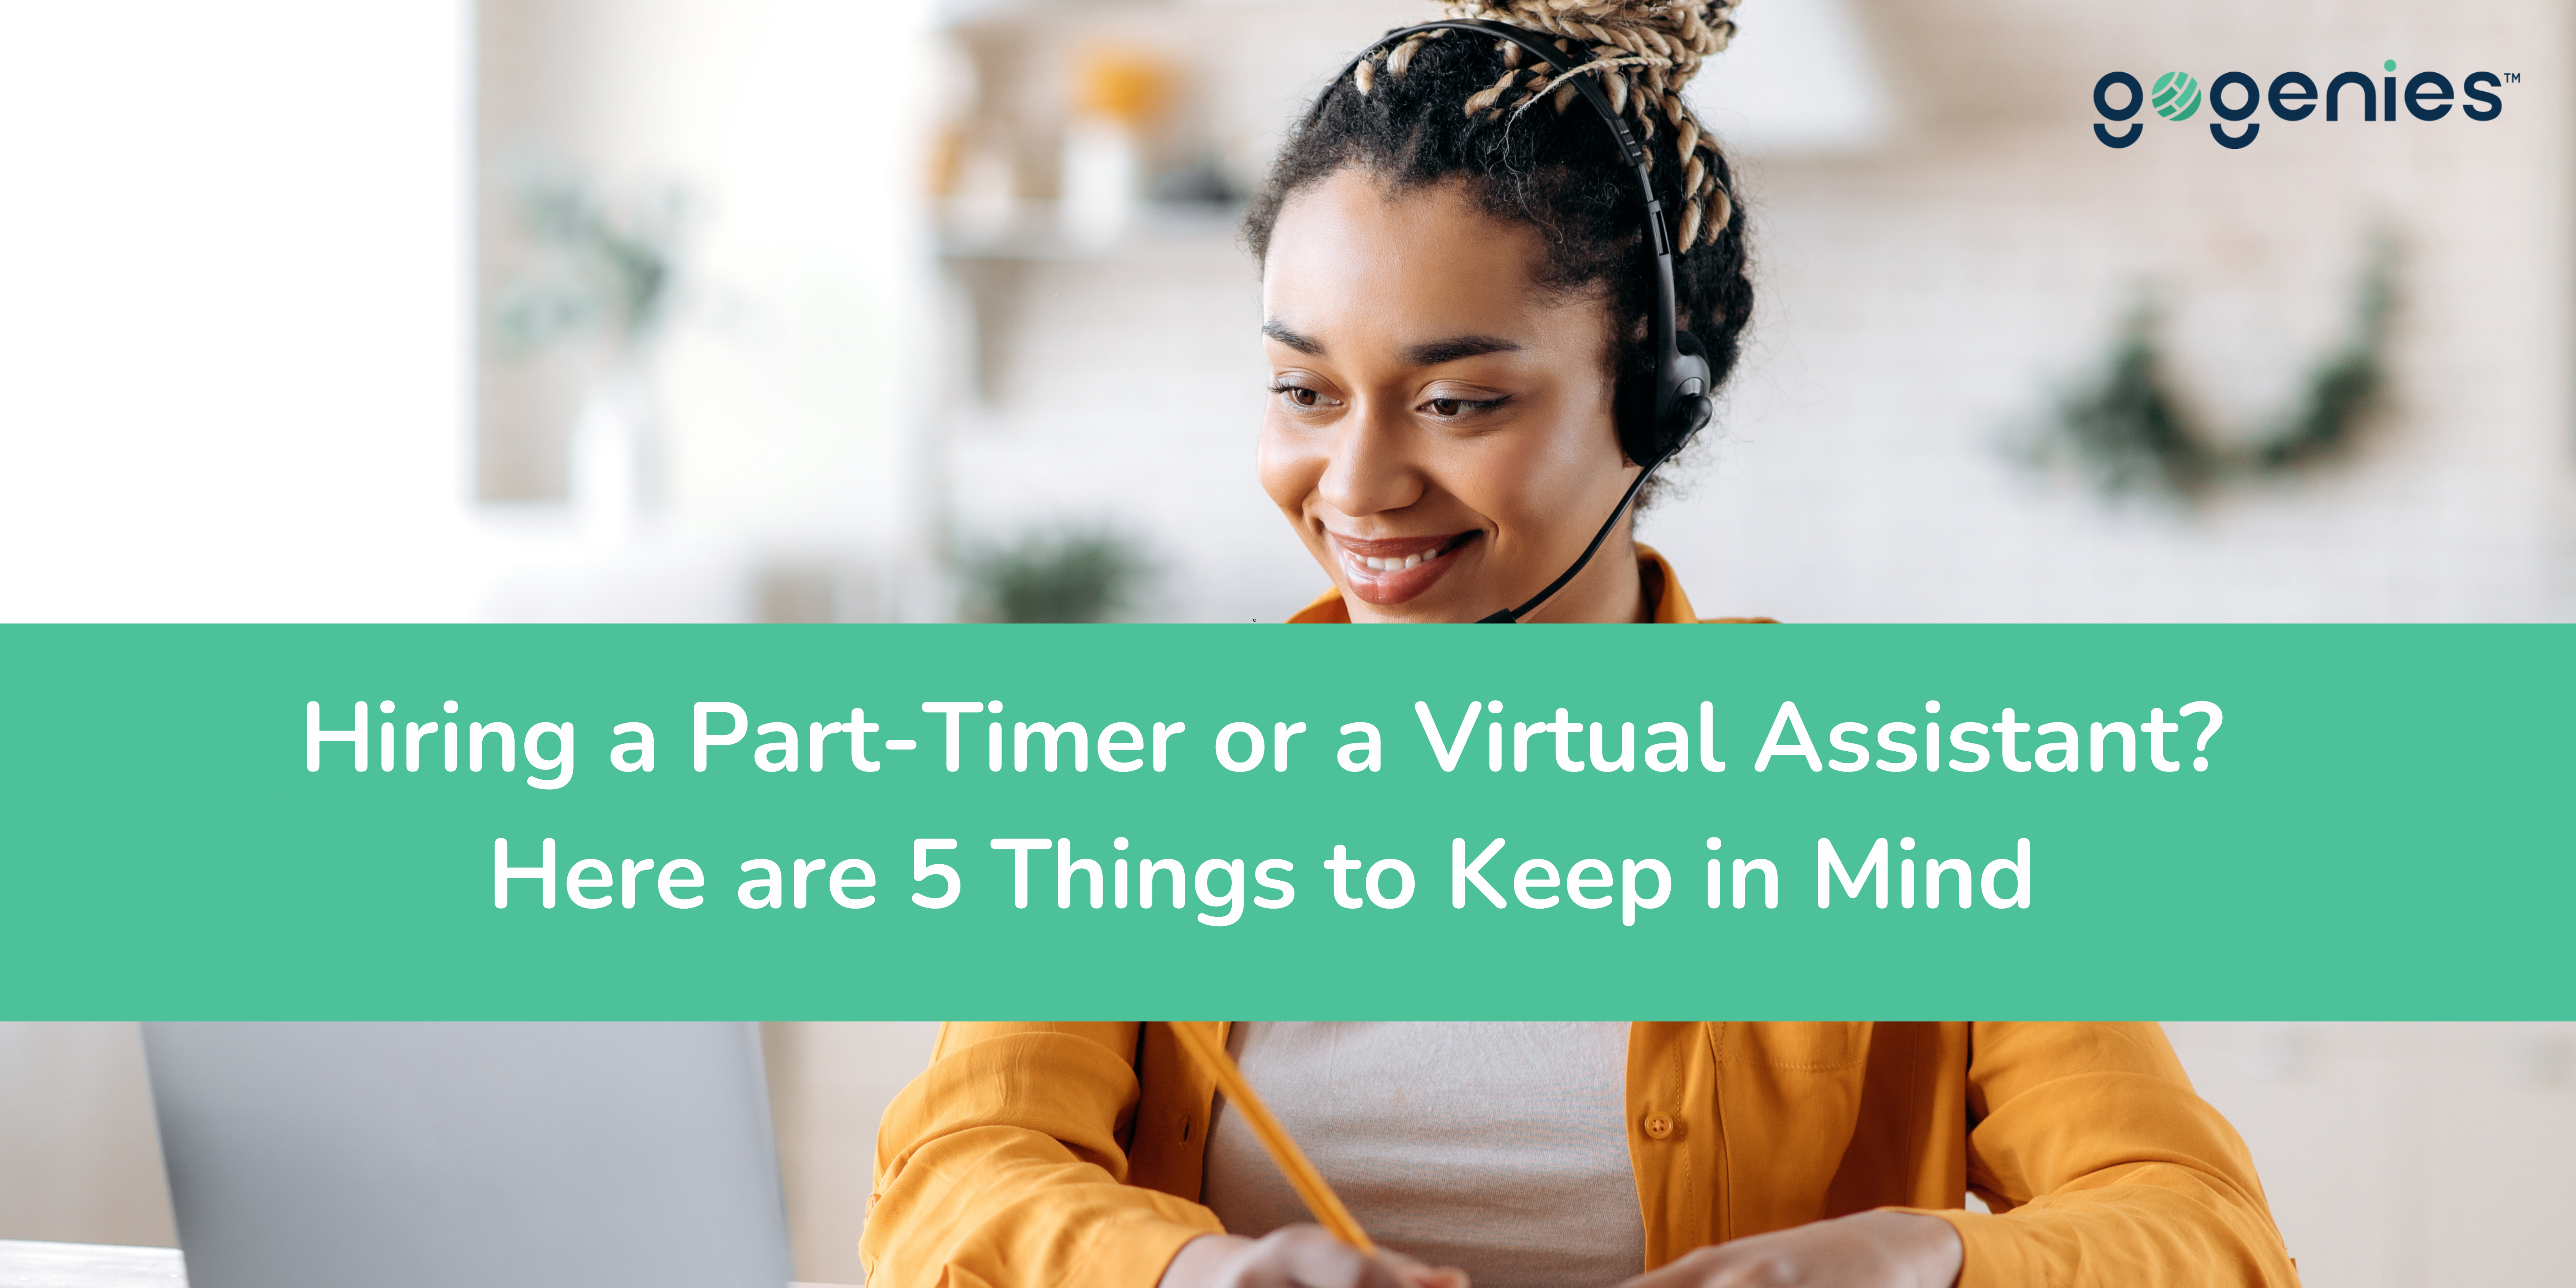 Hiring a Part-Timer or a Virtual Assistant? Here are 5 Things to Keep in Mind